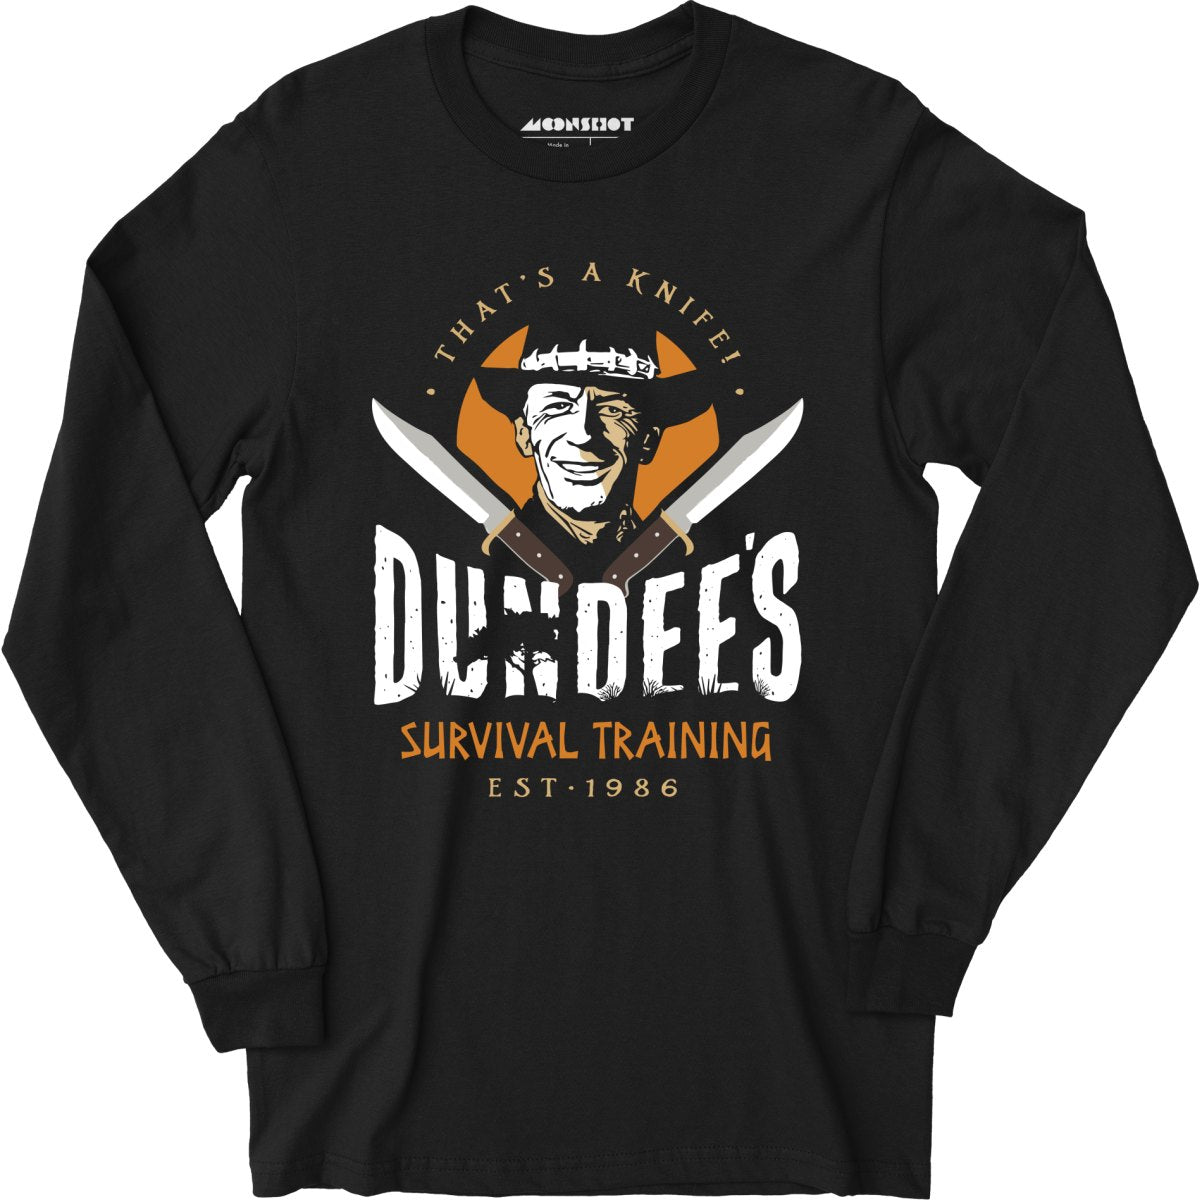 Dundee's Survival Training - Long Sleeve T-Shirt